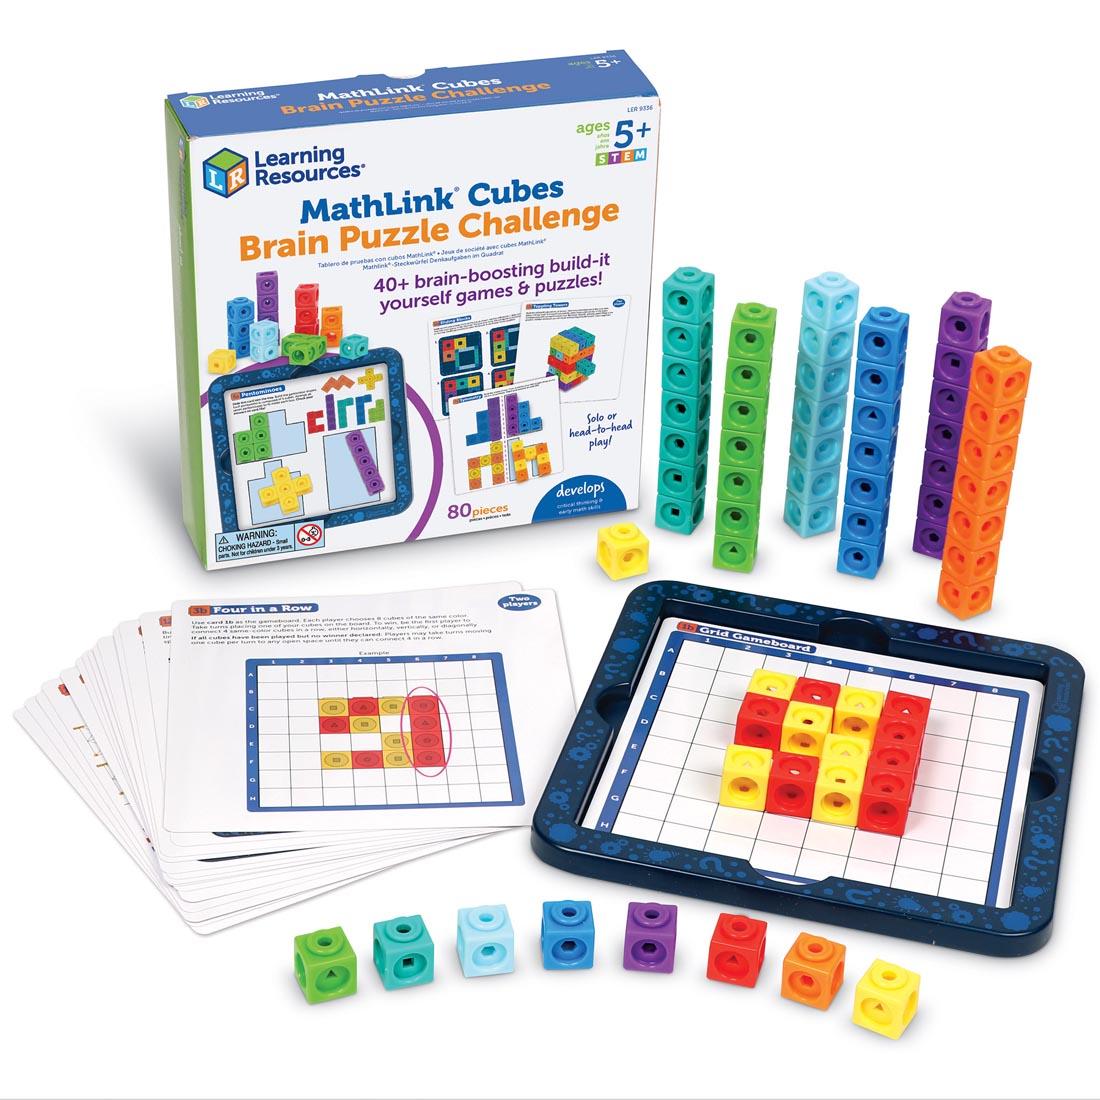 MathLink Cubes Brain Puzzle Challenge, with contents shown outside of packaging